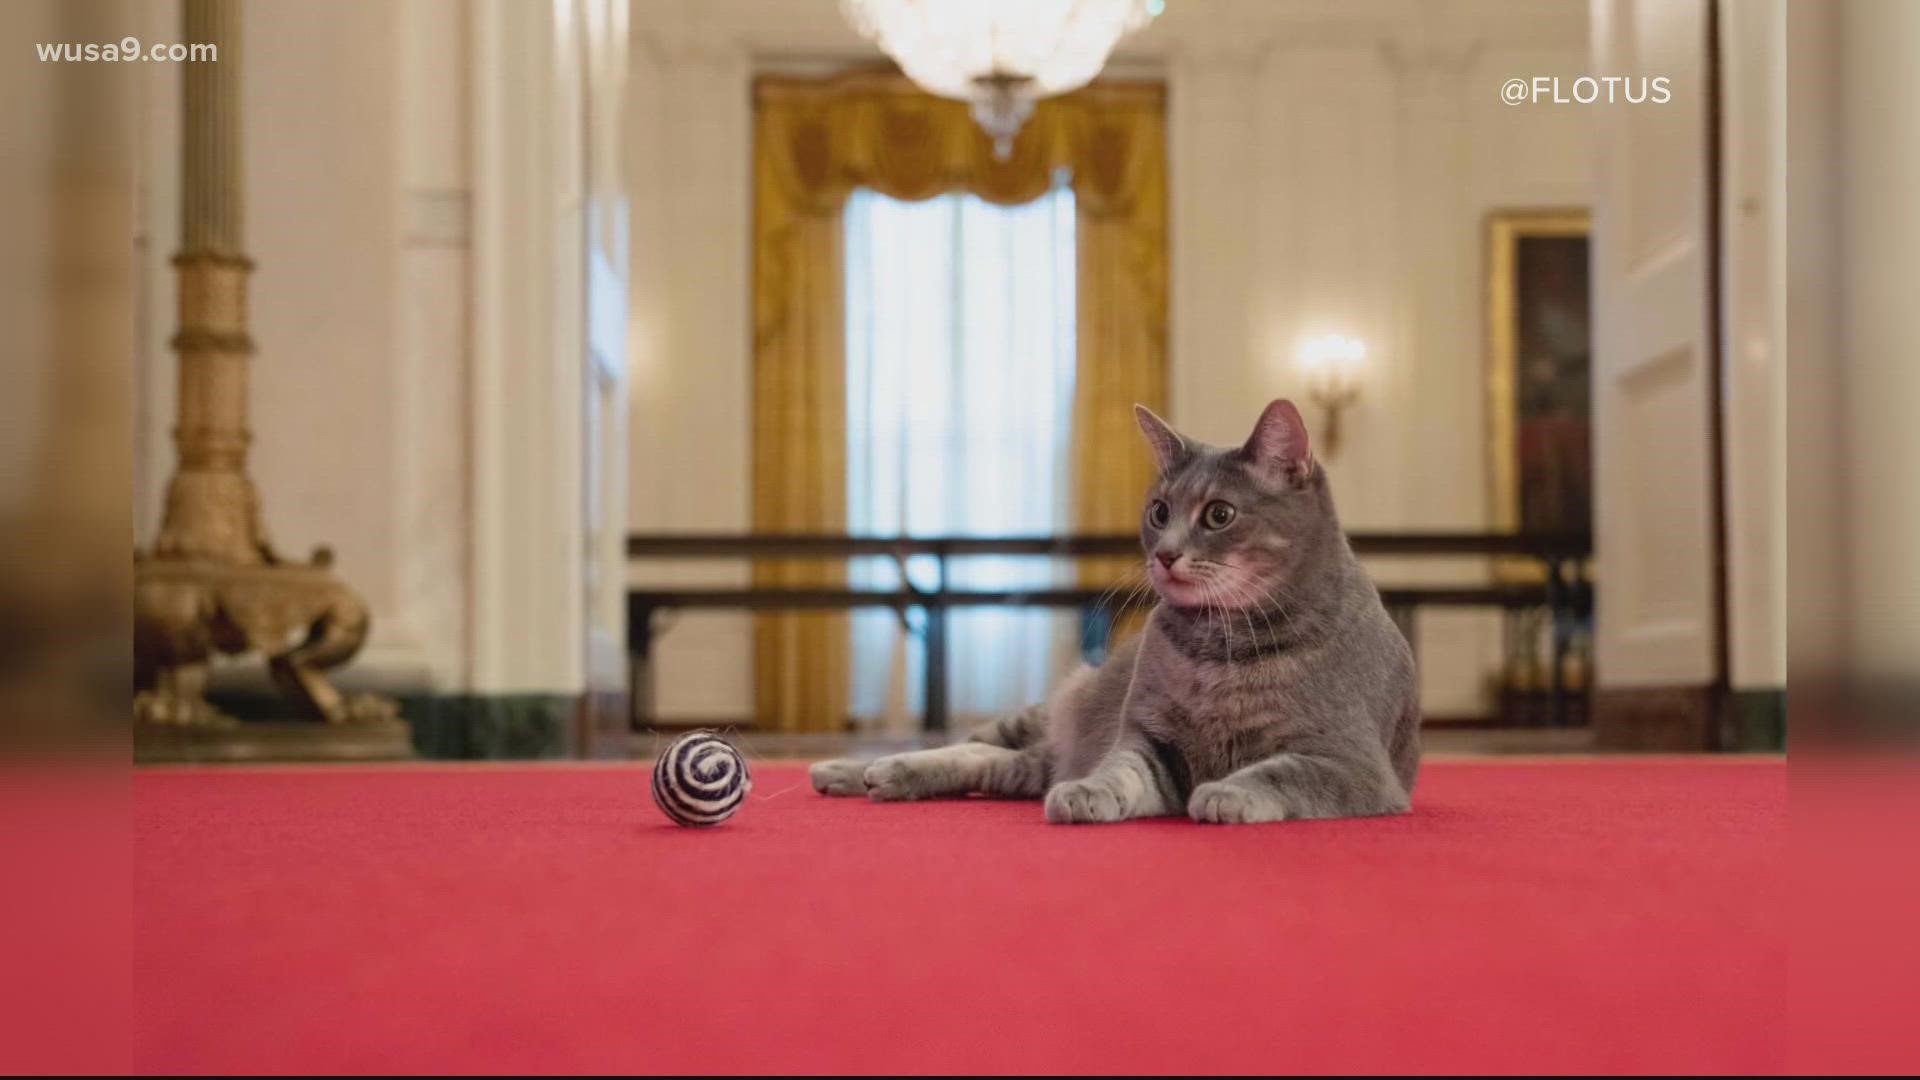 It's the first cat in the White House since George W. Bush.